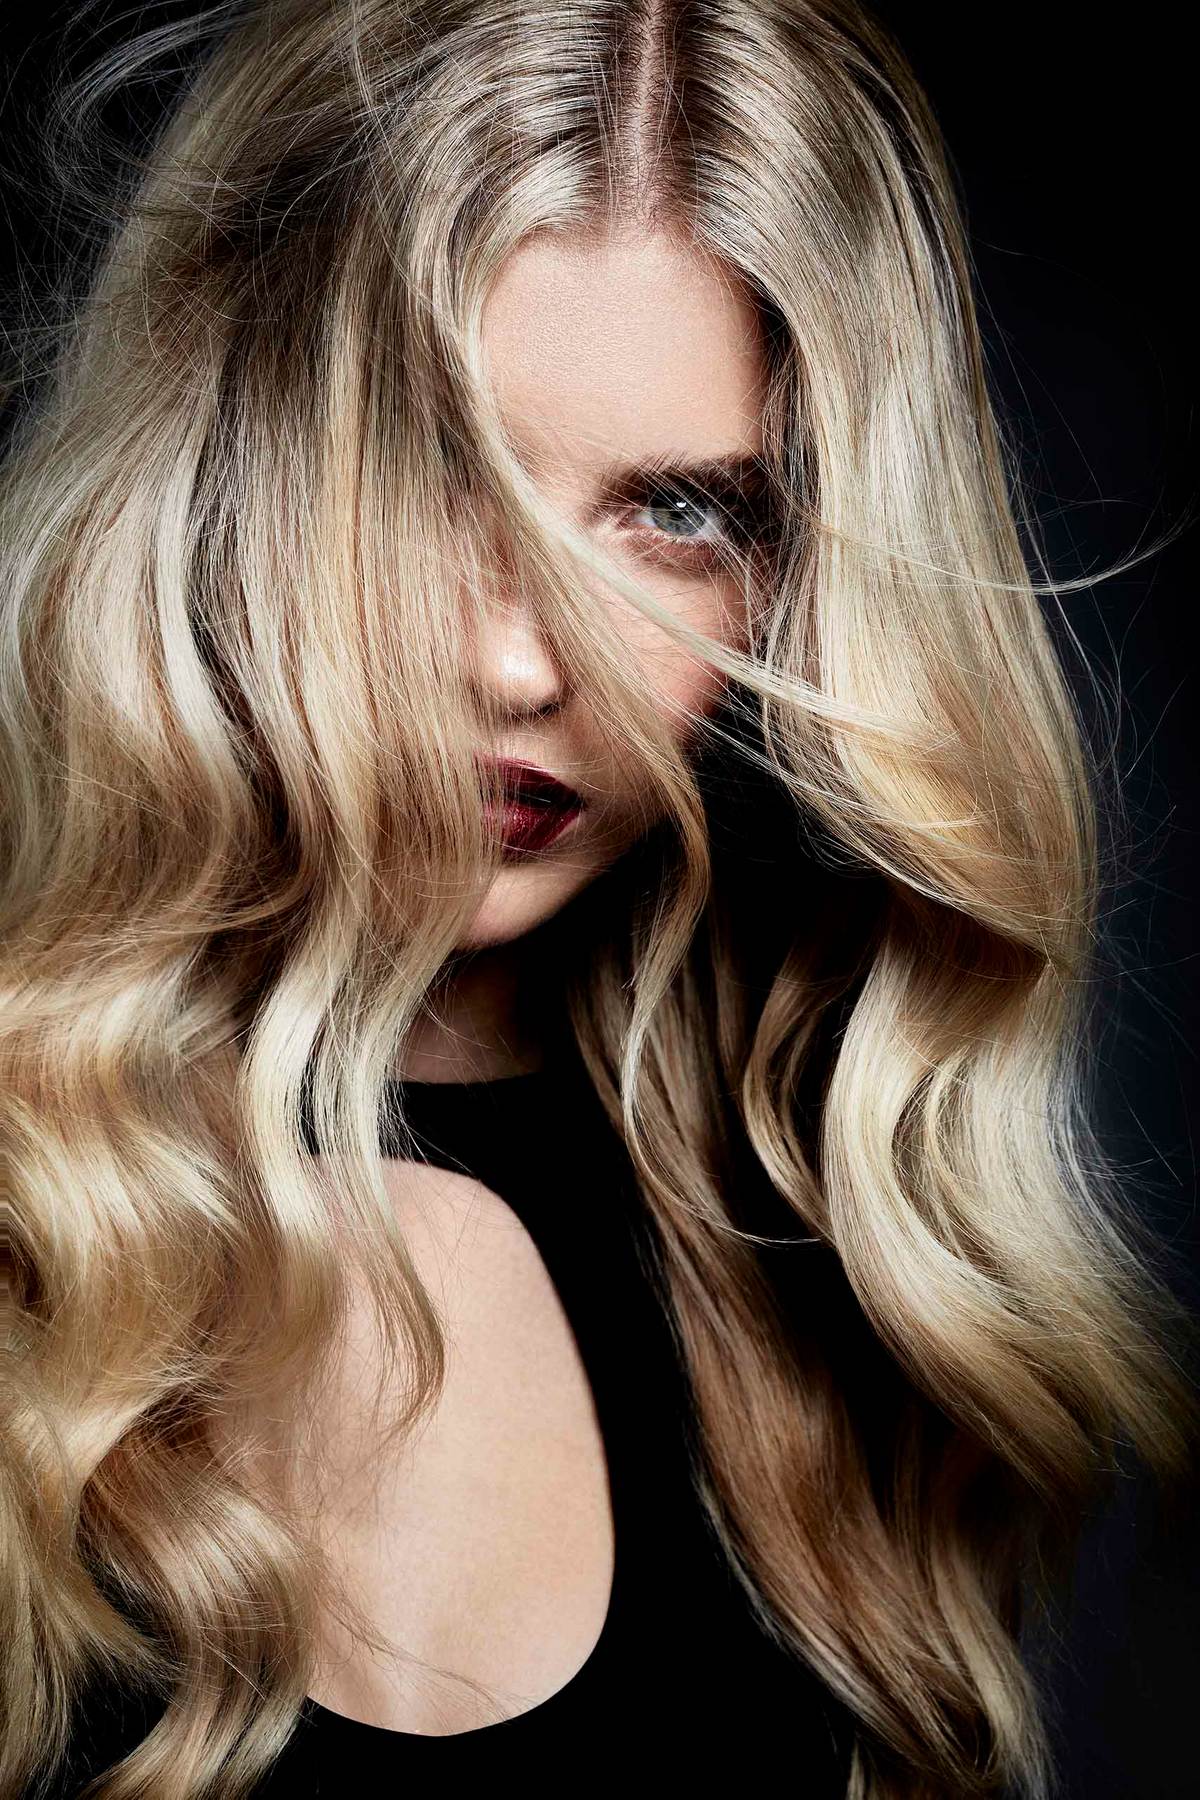 TREND_IN_face_hair_beauty_blond_movement_shoulderlength_wavy_soft_red_lips_female_losAngeles_photographer_Dorit_Thies.jpg